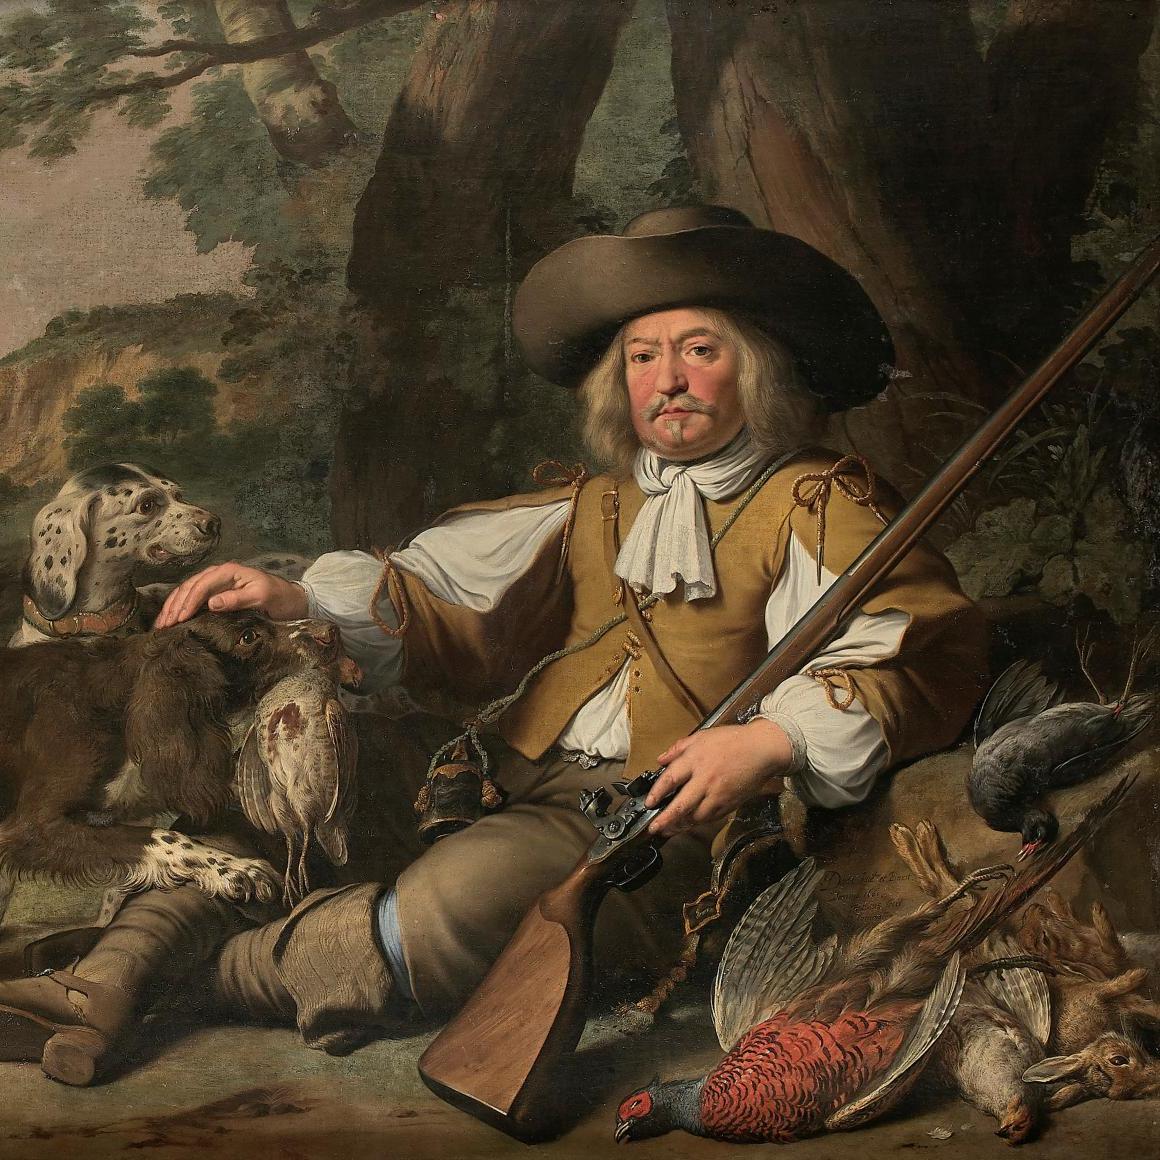 The First French Portrait of a Hunter? - Spotlight